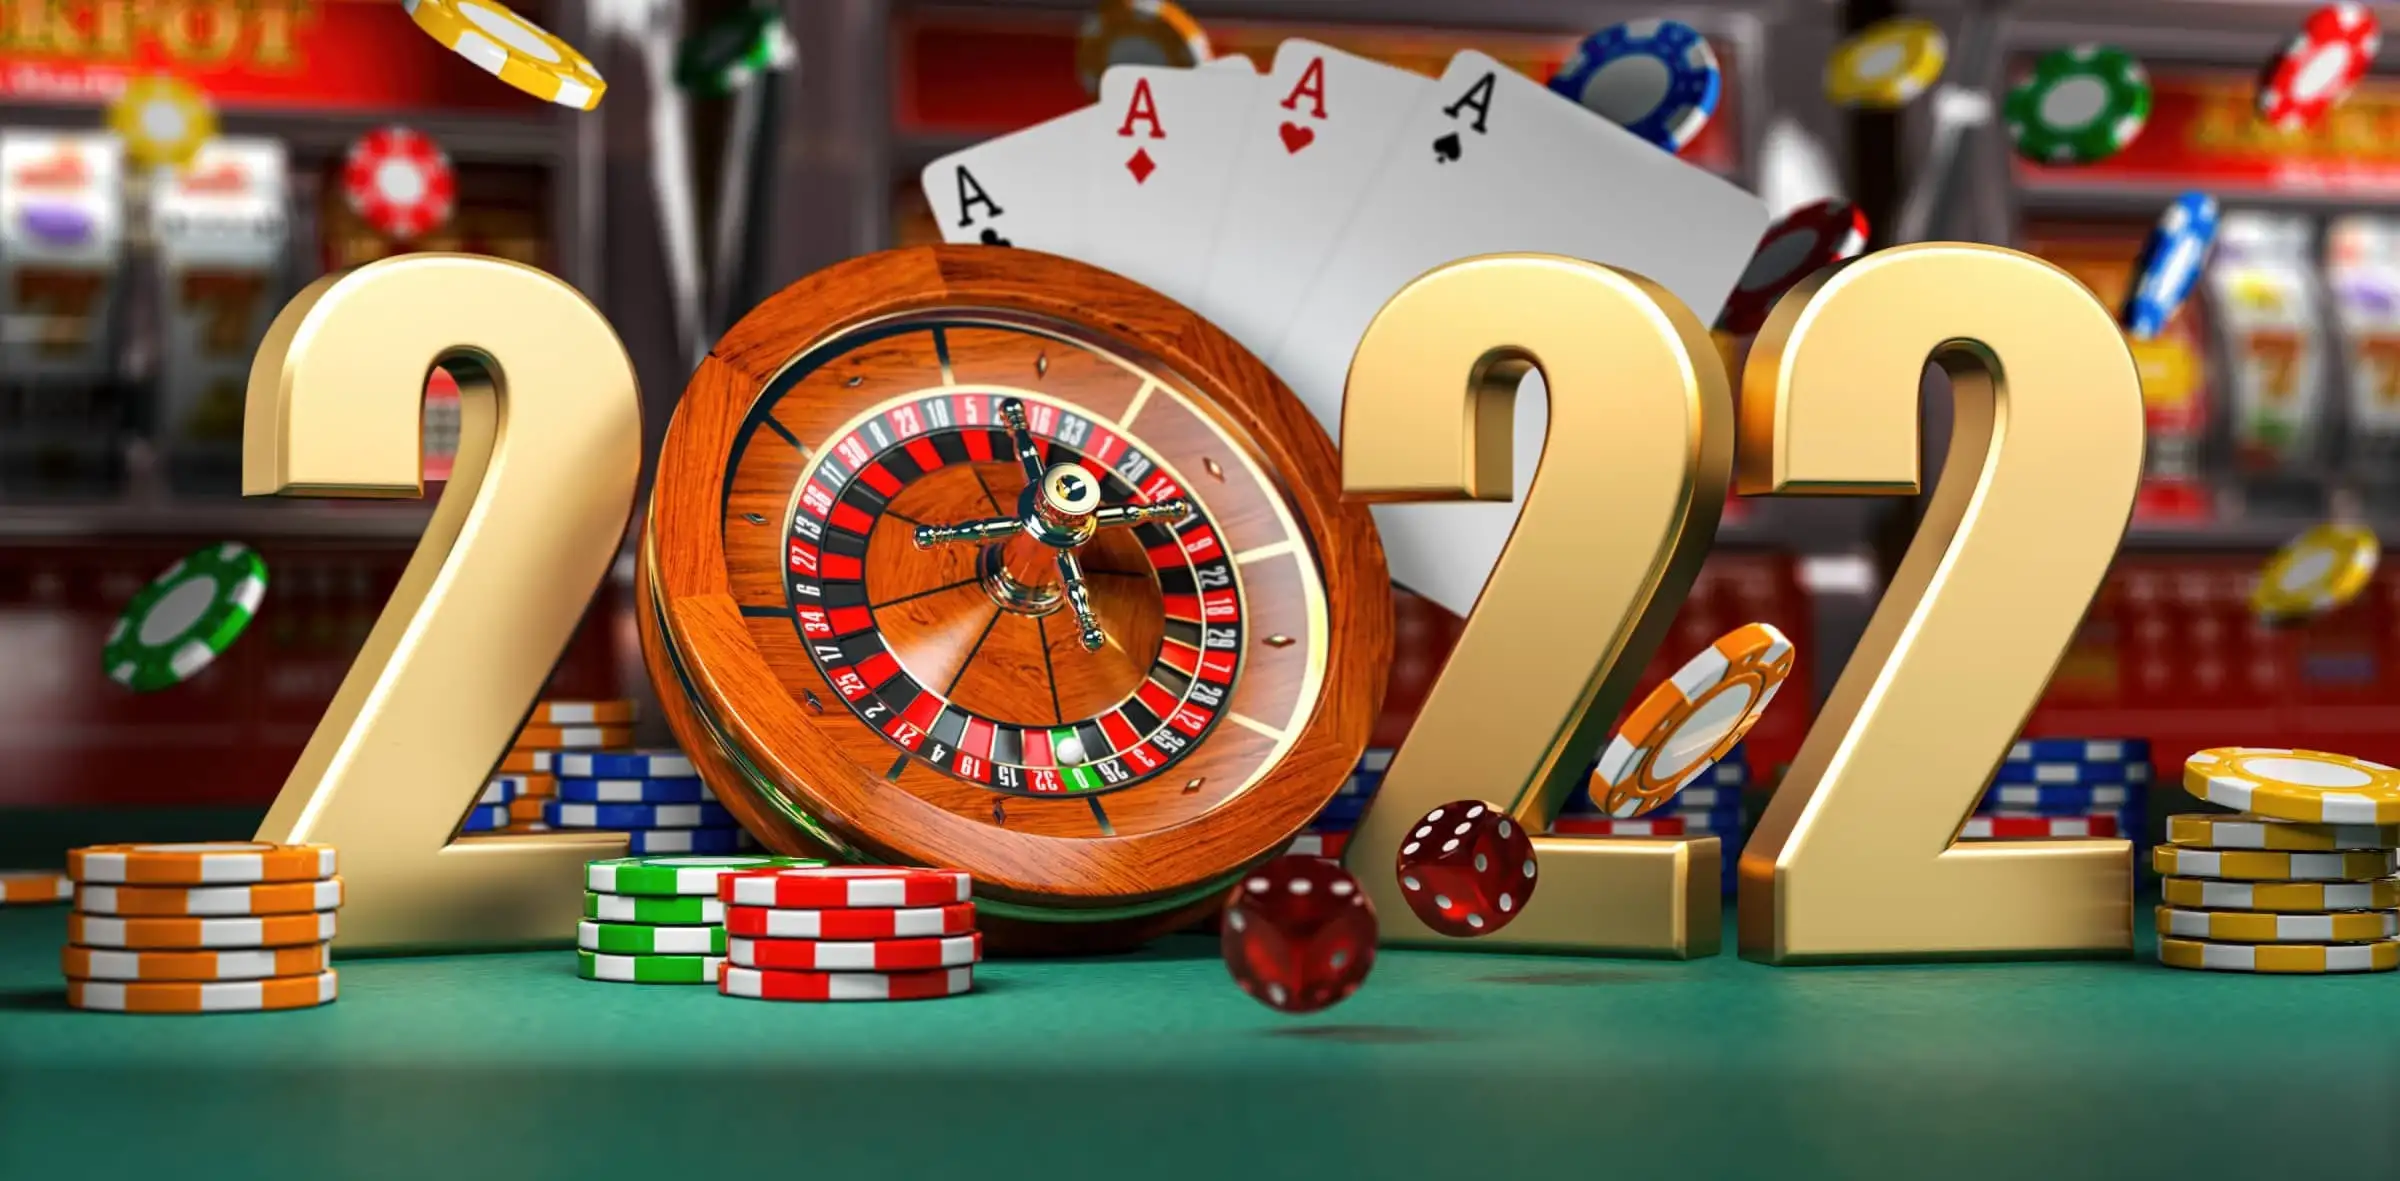 Online casinos with the highest traffic generate more revenue